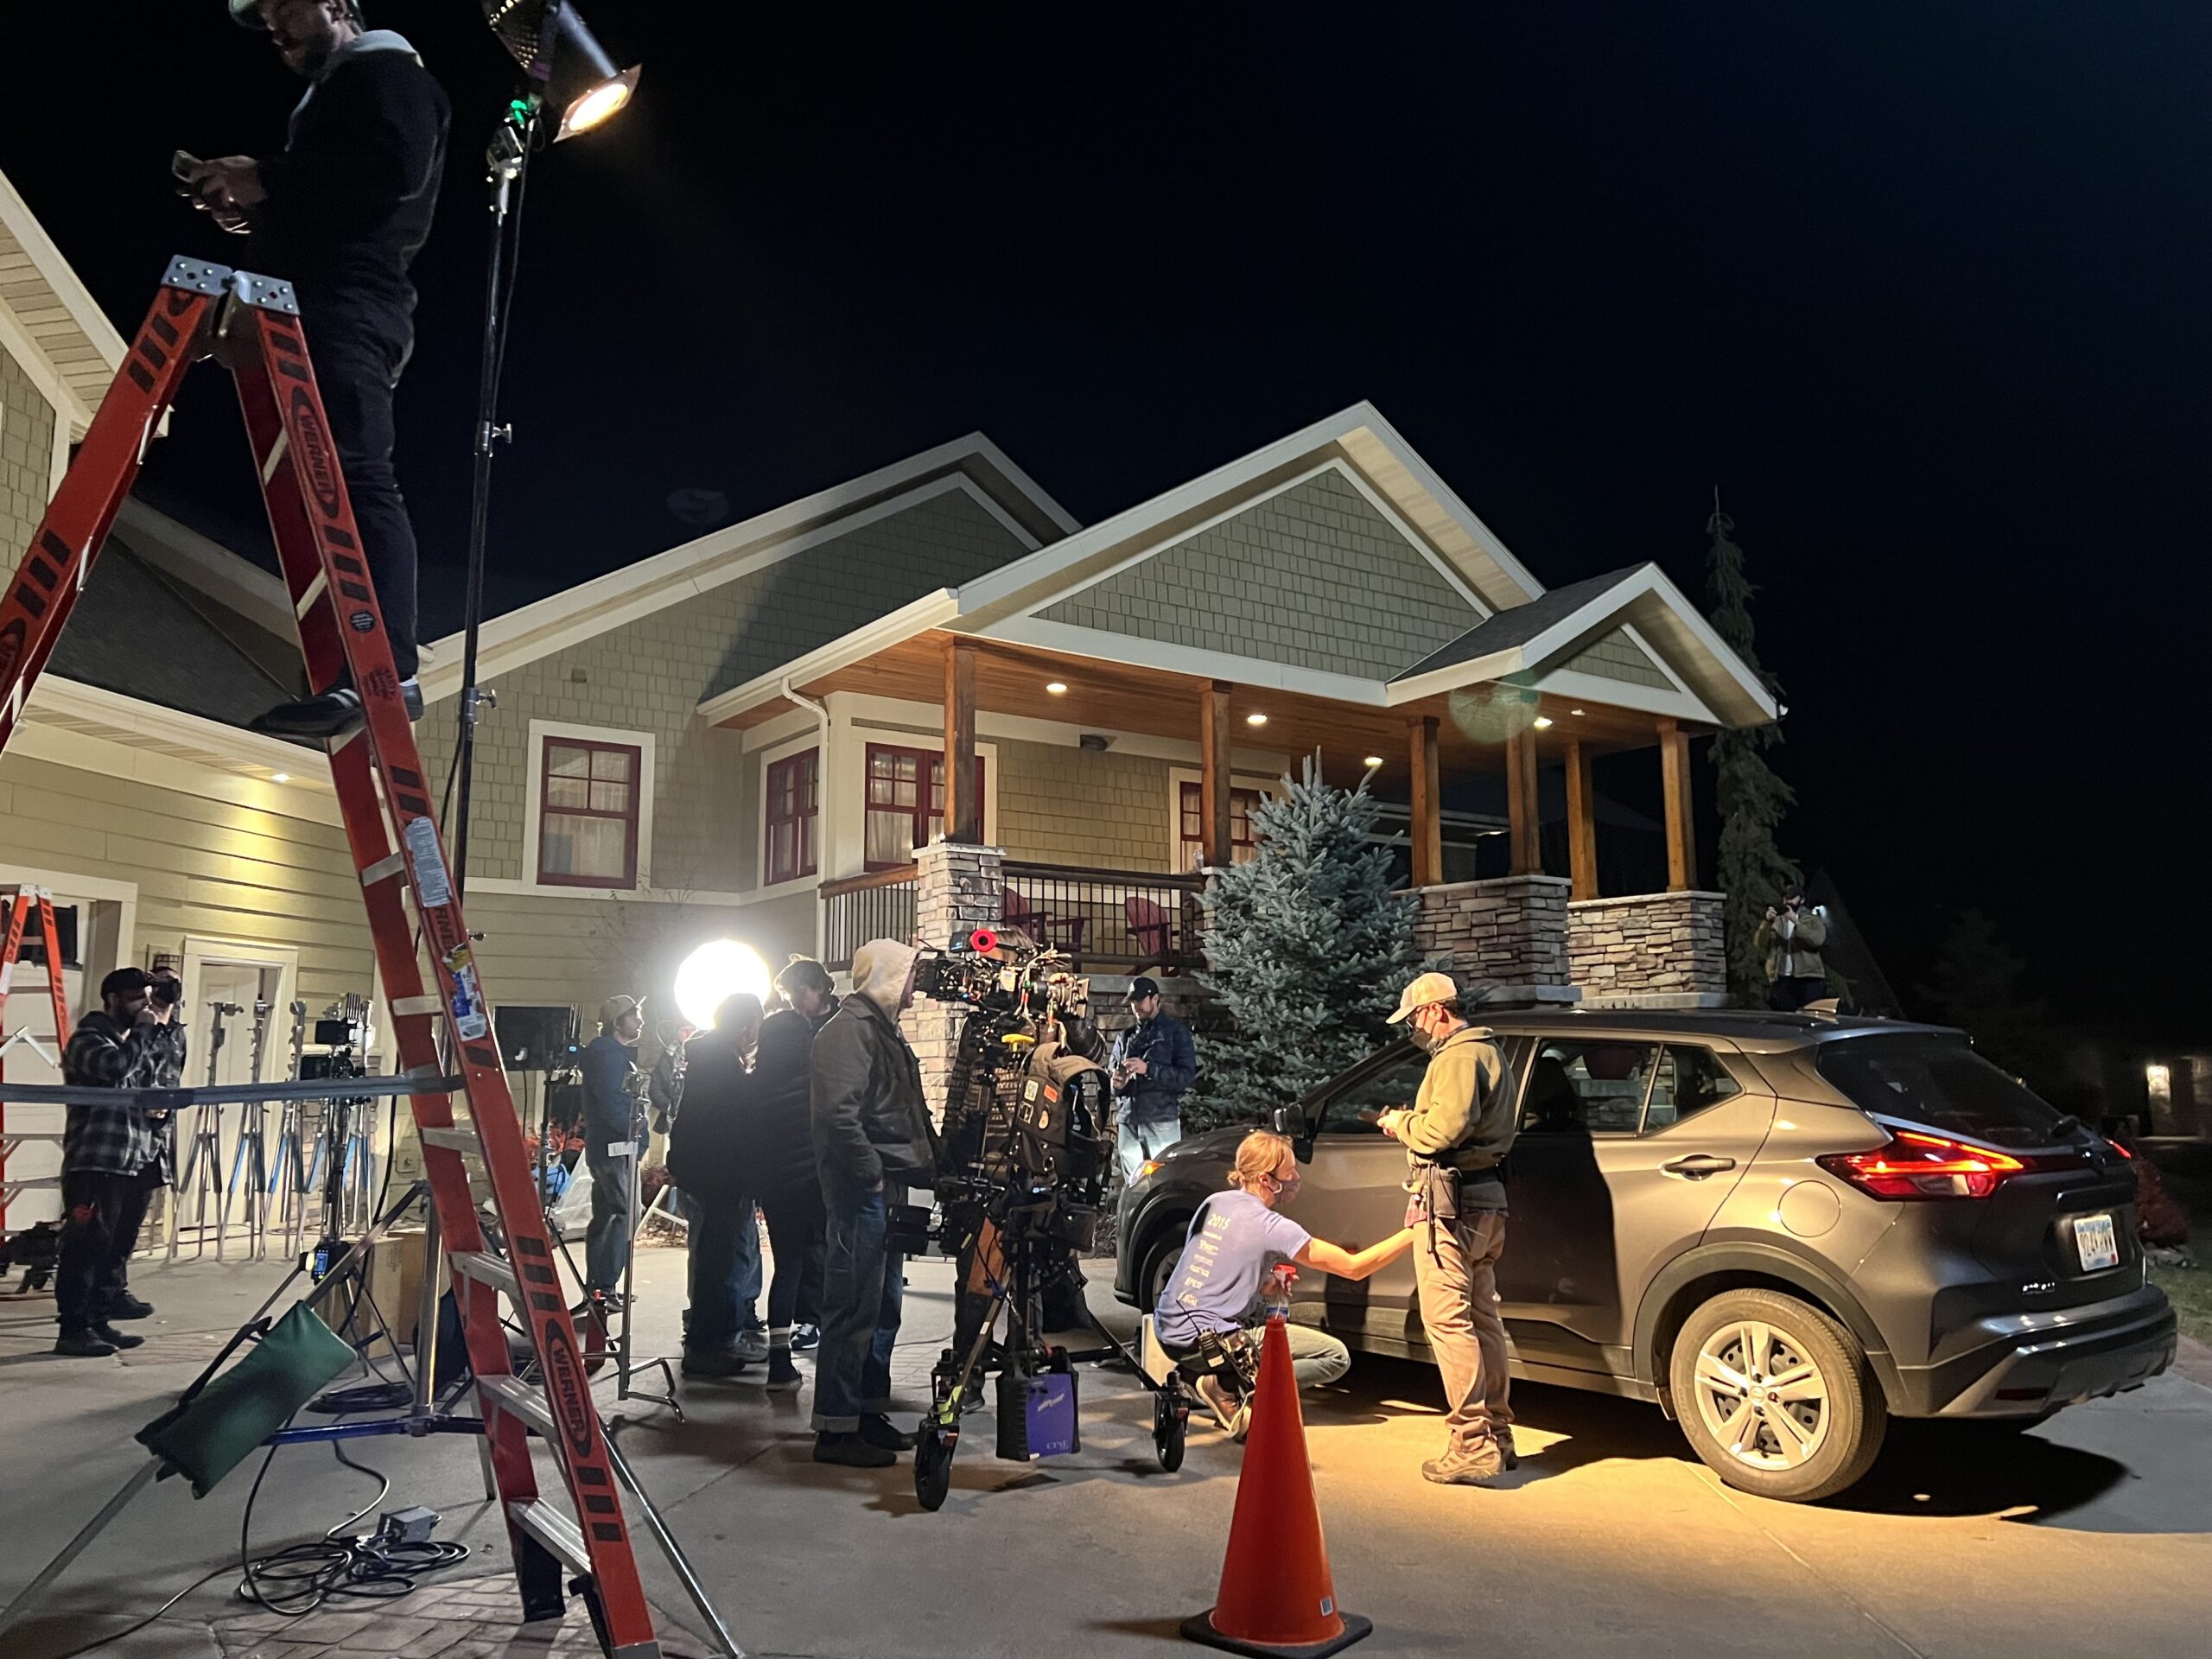 Minnesota Production Industry Lauds Increase in Film Production Tax Credit Program